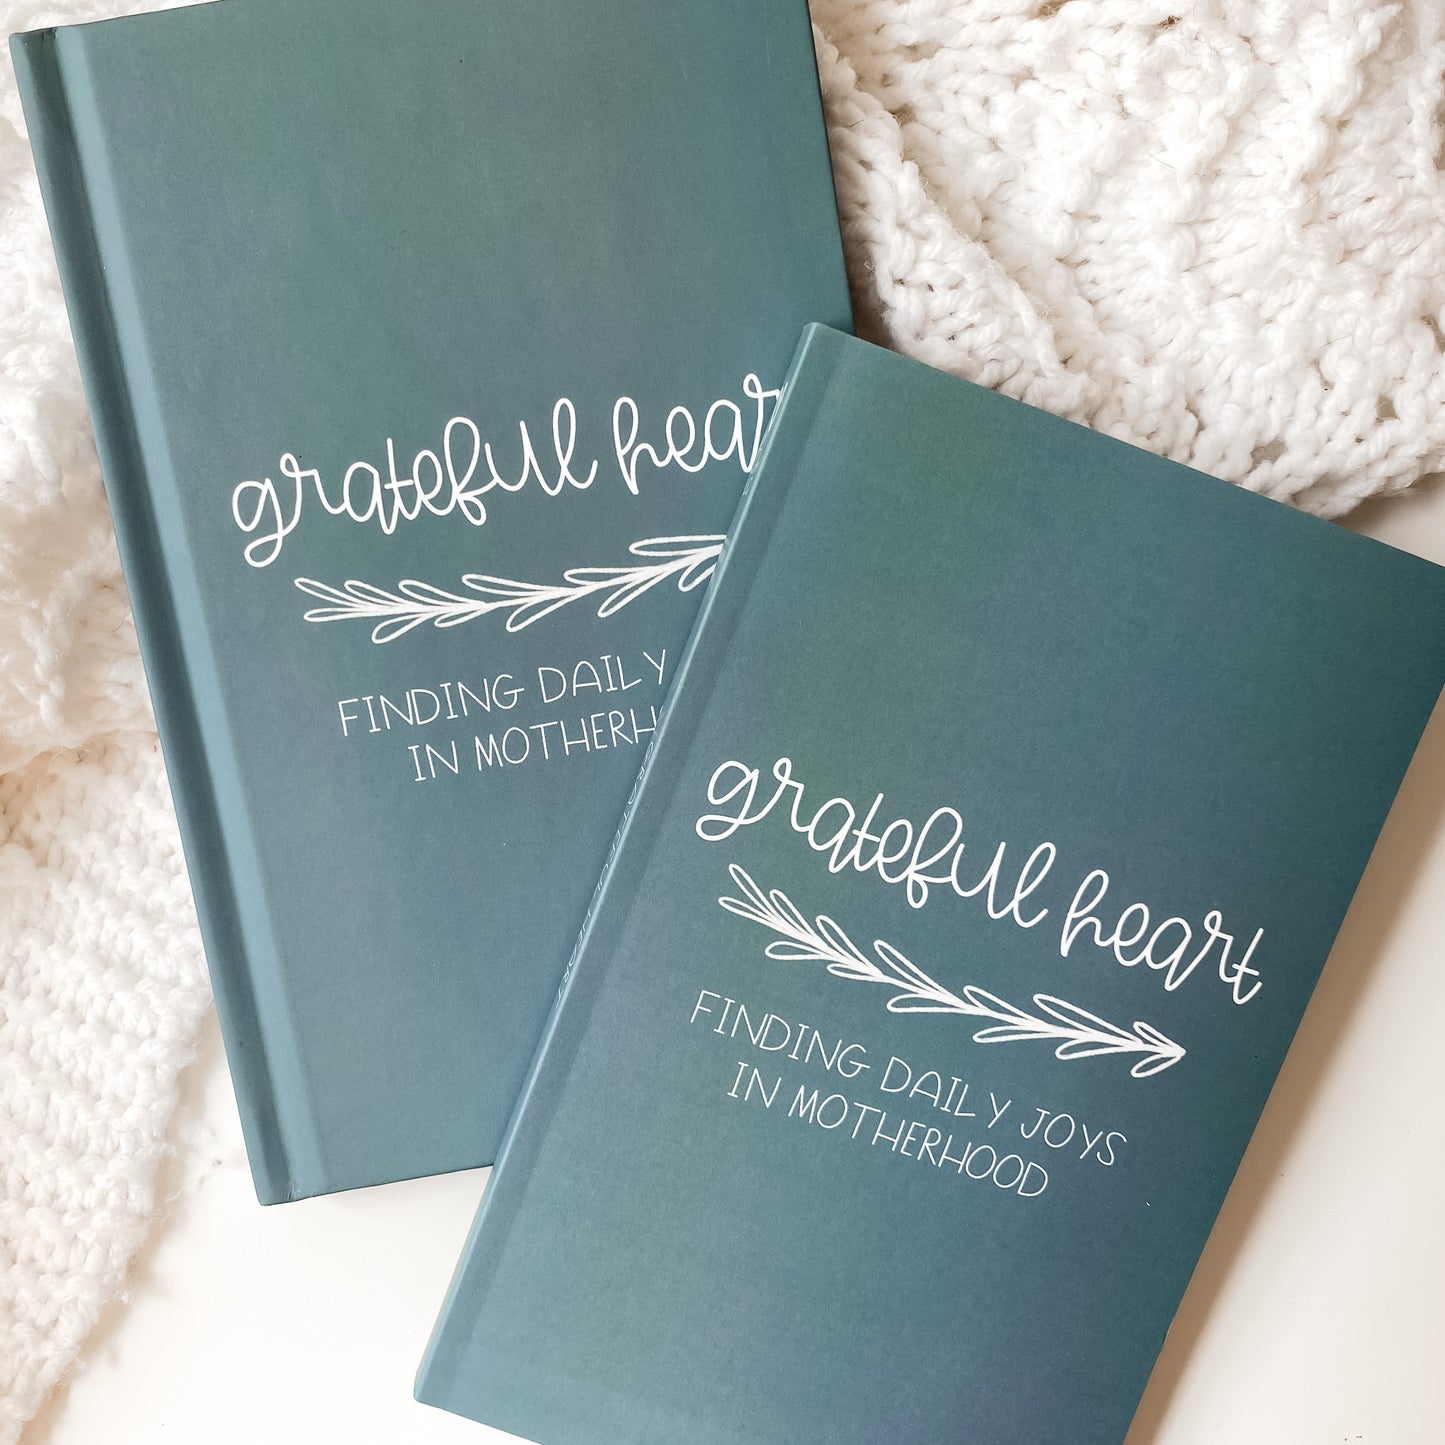 Blue gratitude journals in hardcover and paperback titled Grateful Heart Finding Daily Joys in Motherhood